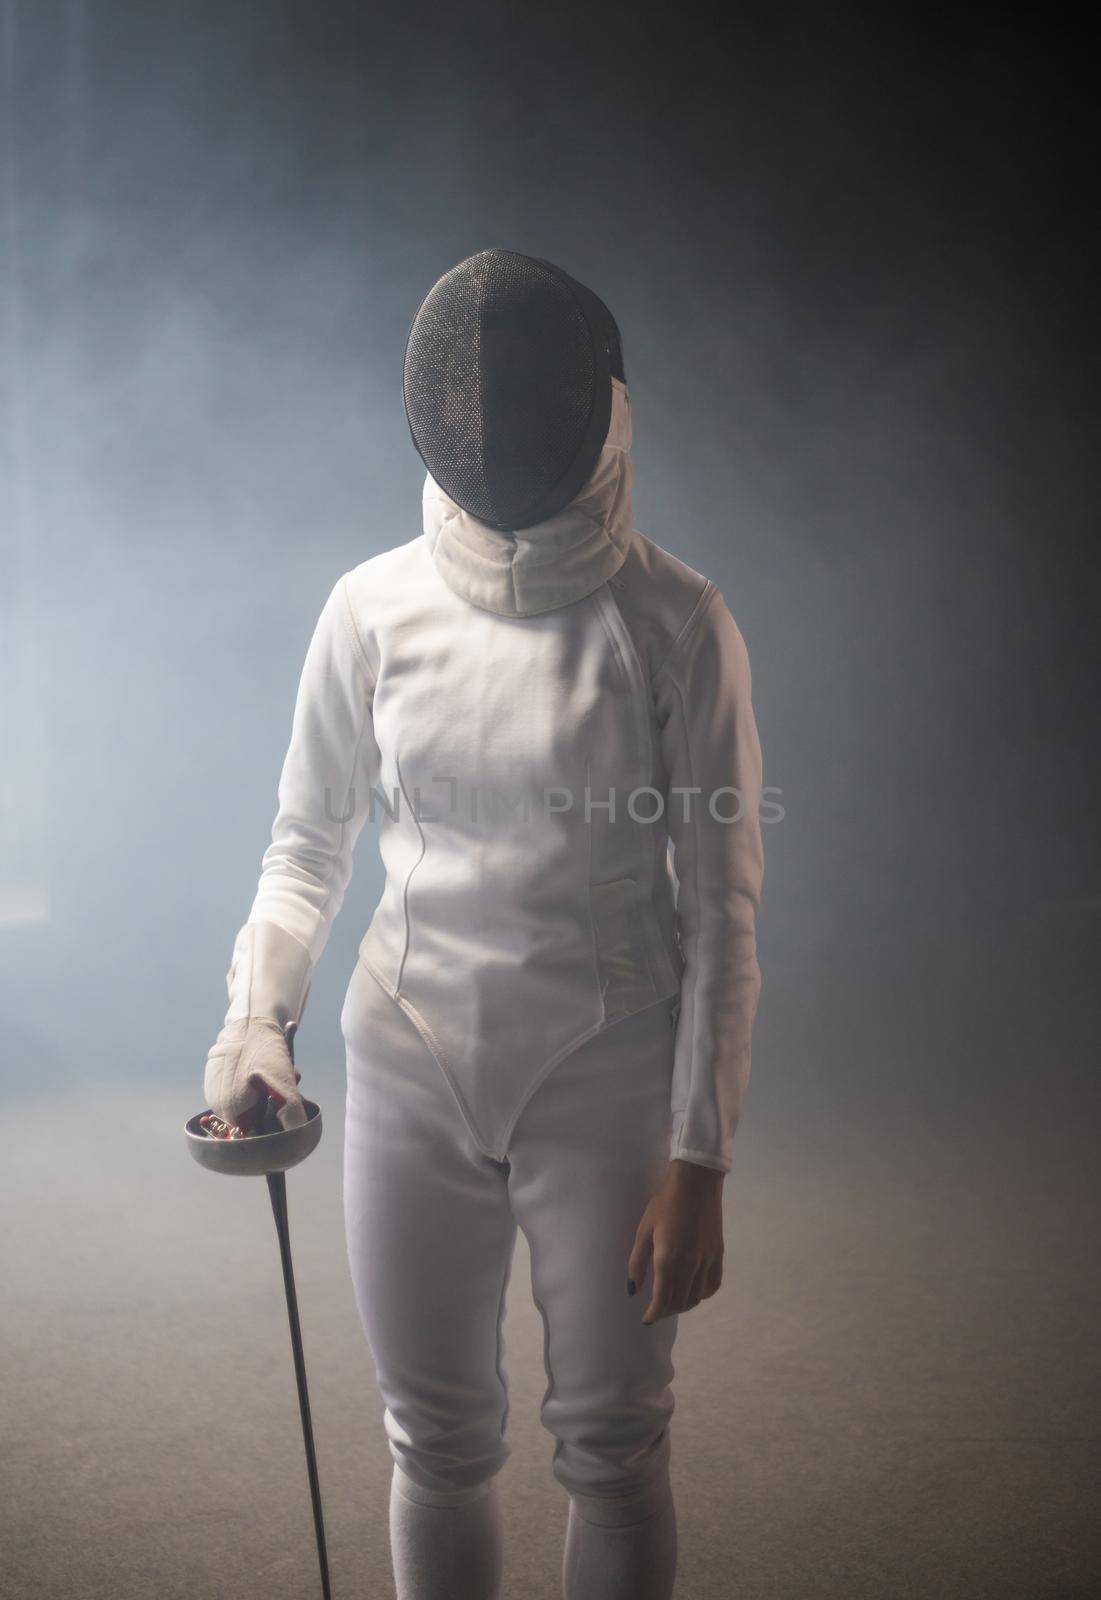 A young woman fencer in protective helmet standing with a sword down. Mid shot